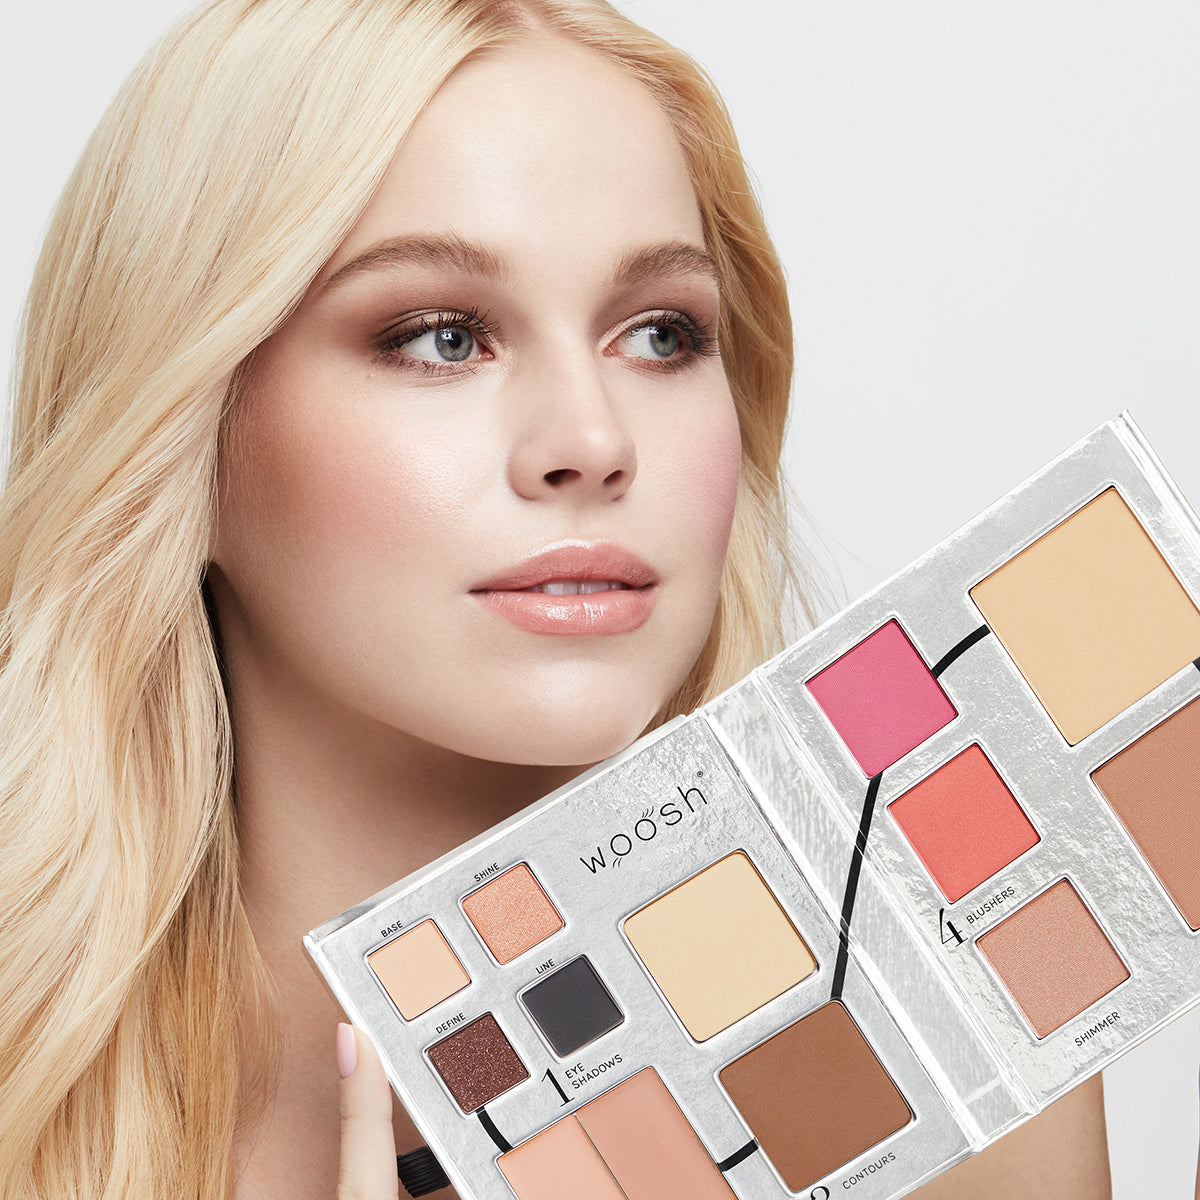 a photo of a fair-skinned model wearing beautiful, natural-looking makeup holding the Fold Out Face palette in shade #1 light